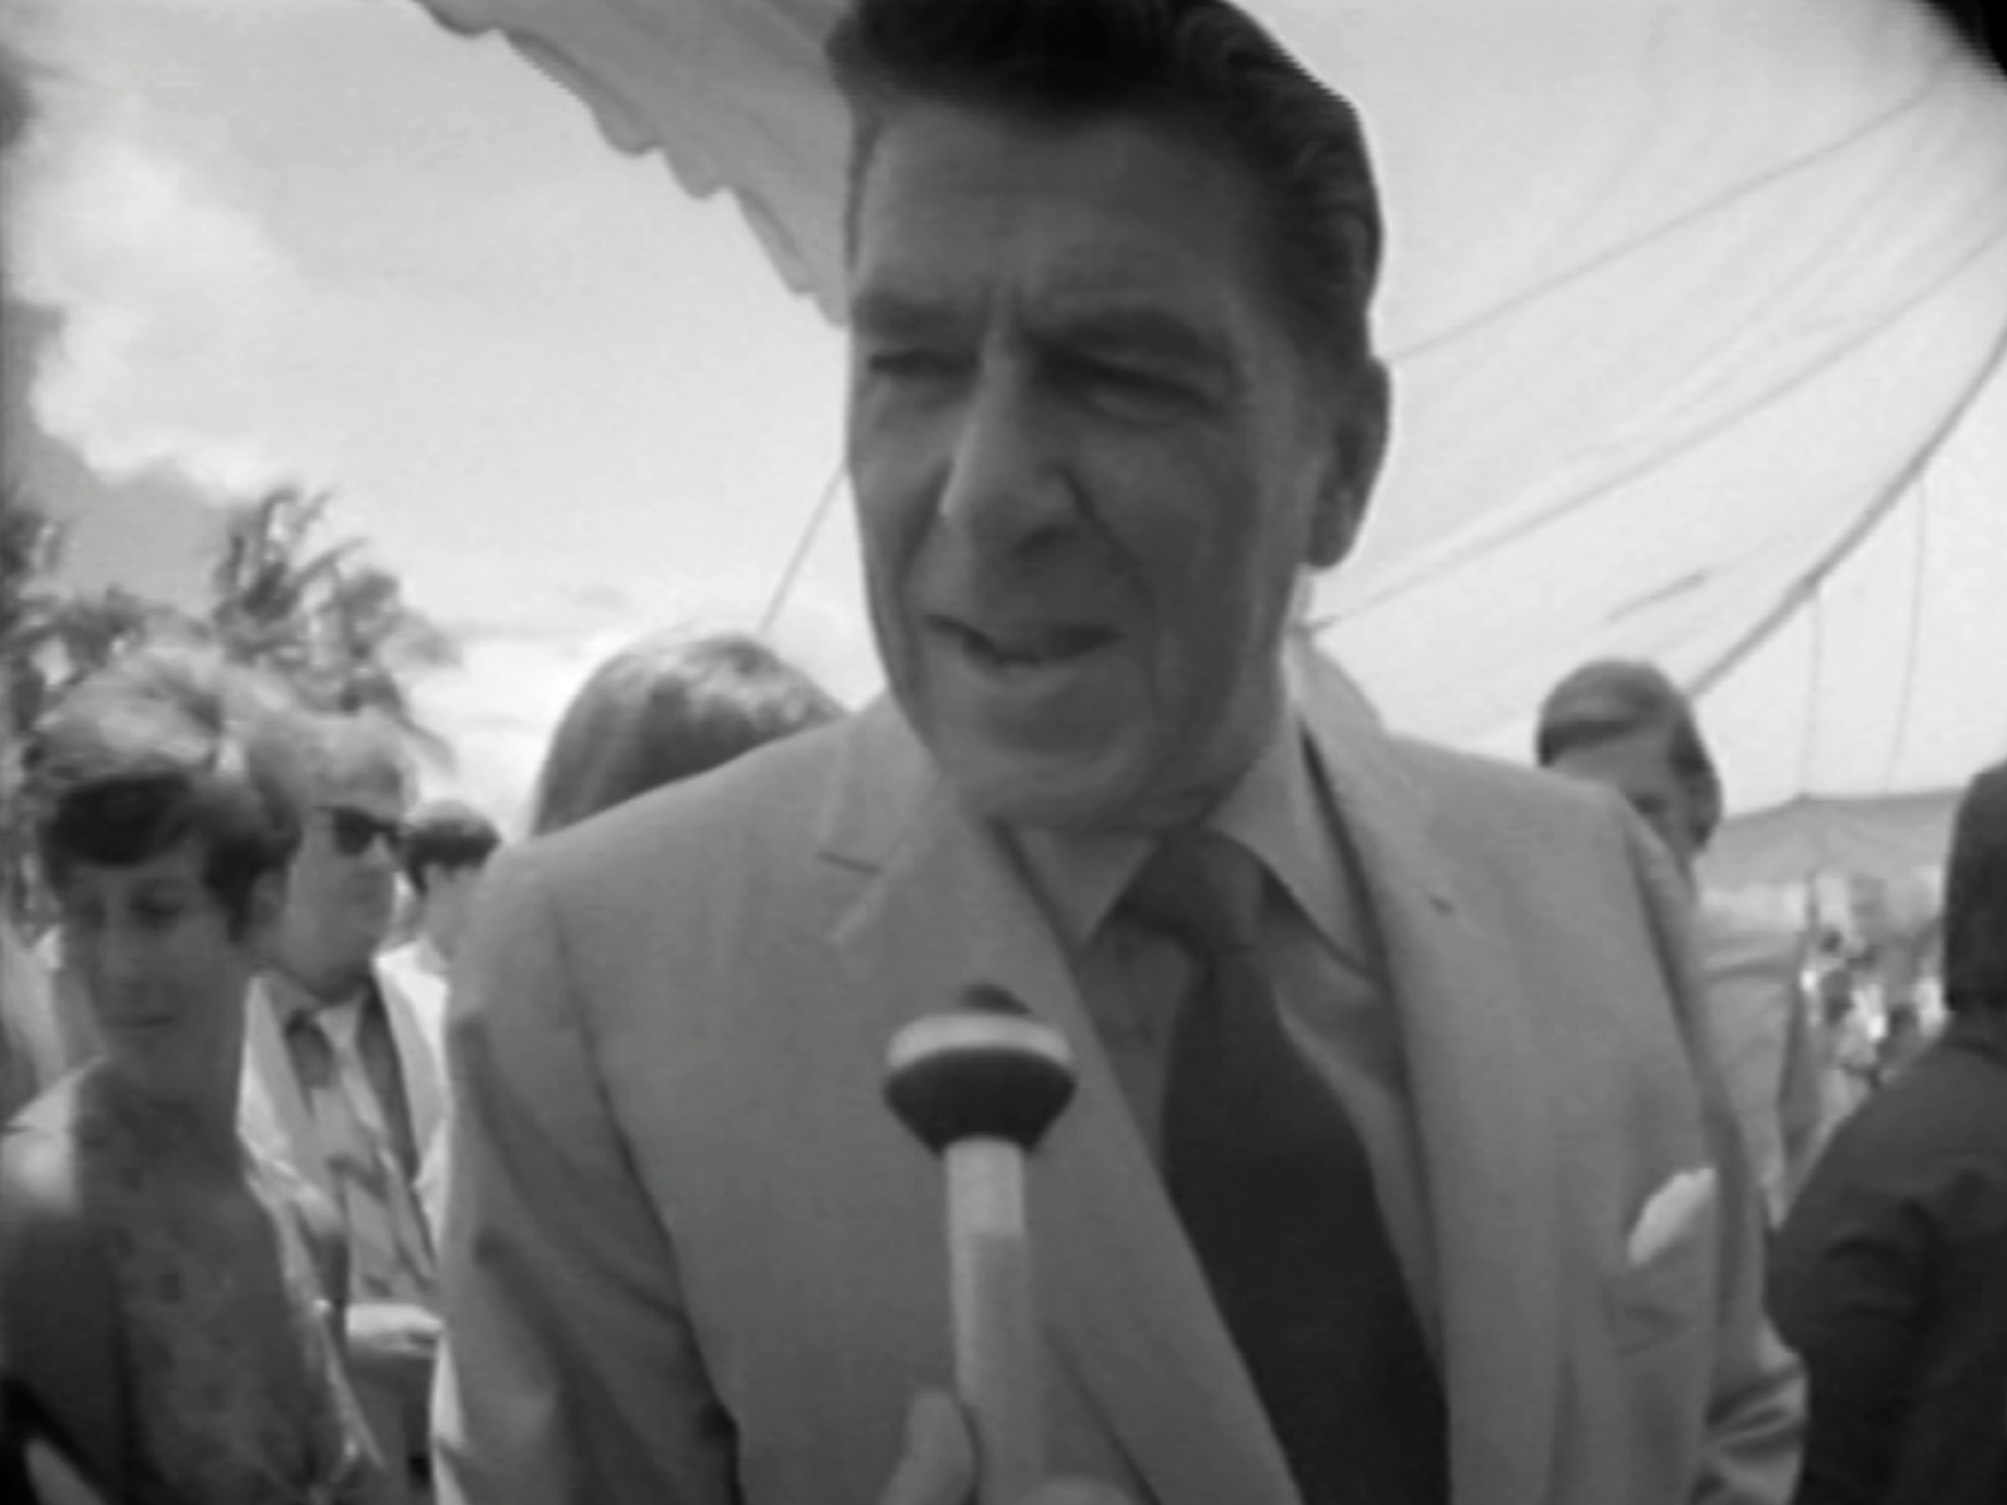 Ronald Reagan in TVTV's fisheye lens at the 1972 Republican National Convention